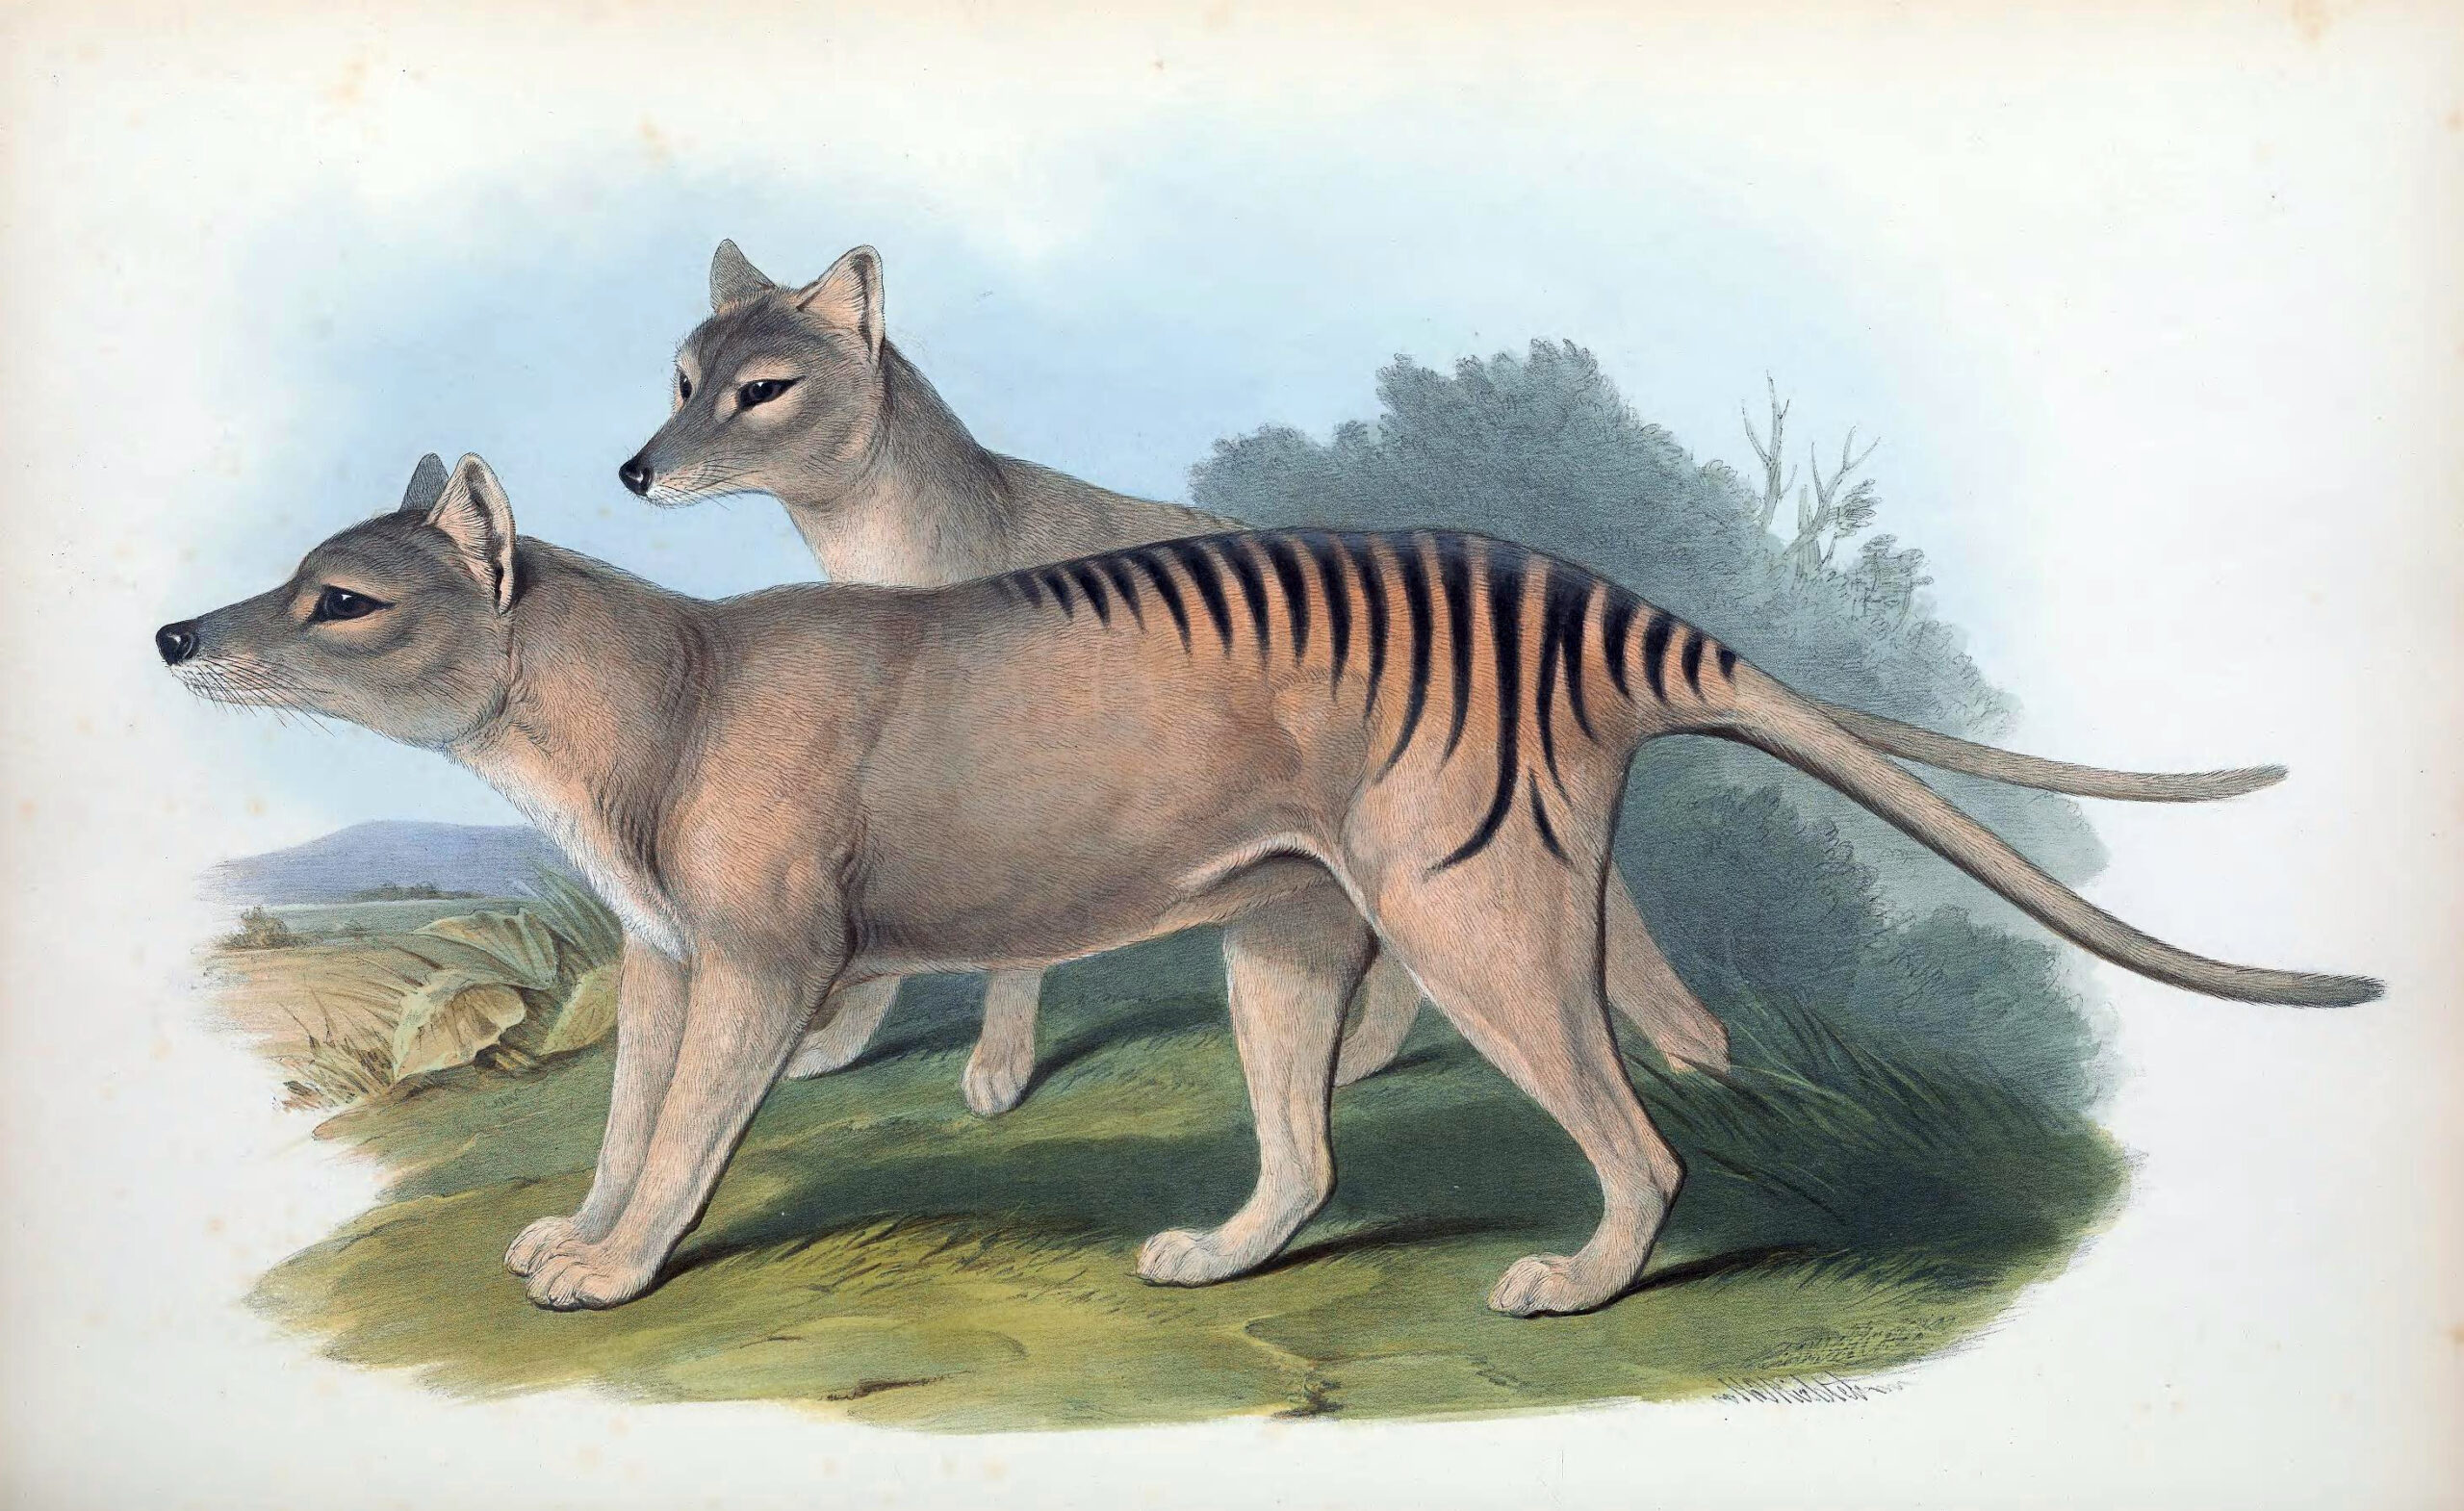 A genetics startup wants to bring the Tasmanian tiger back from extinction